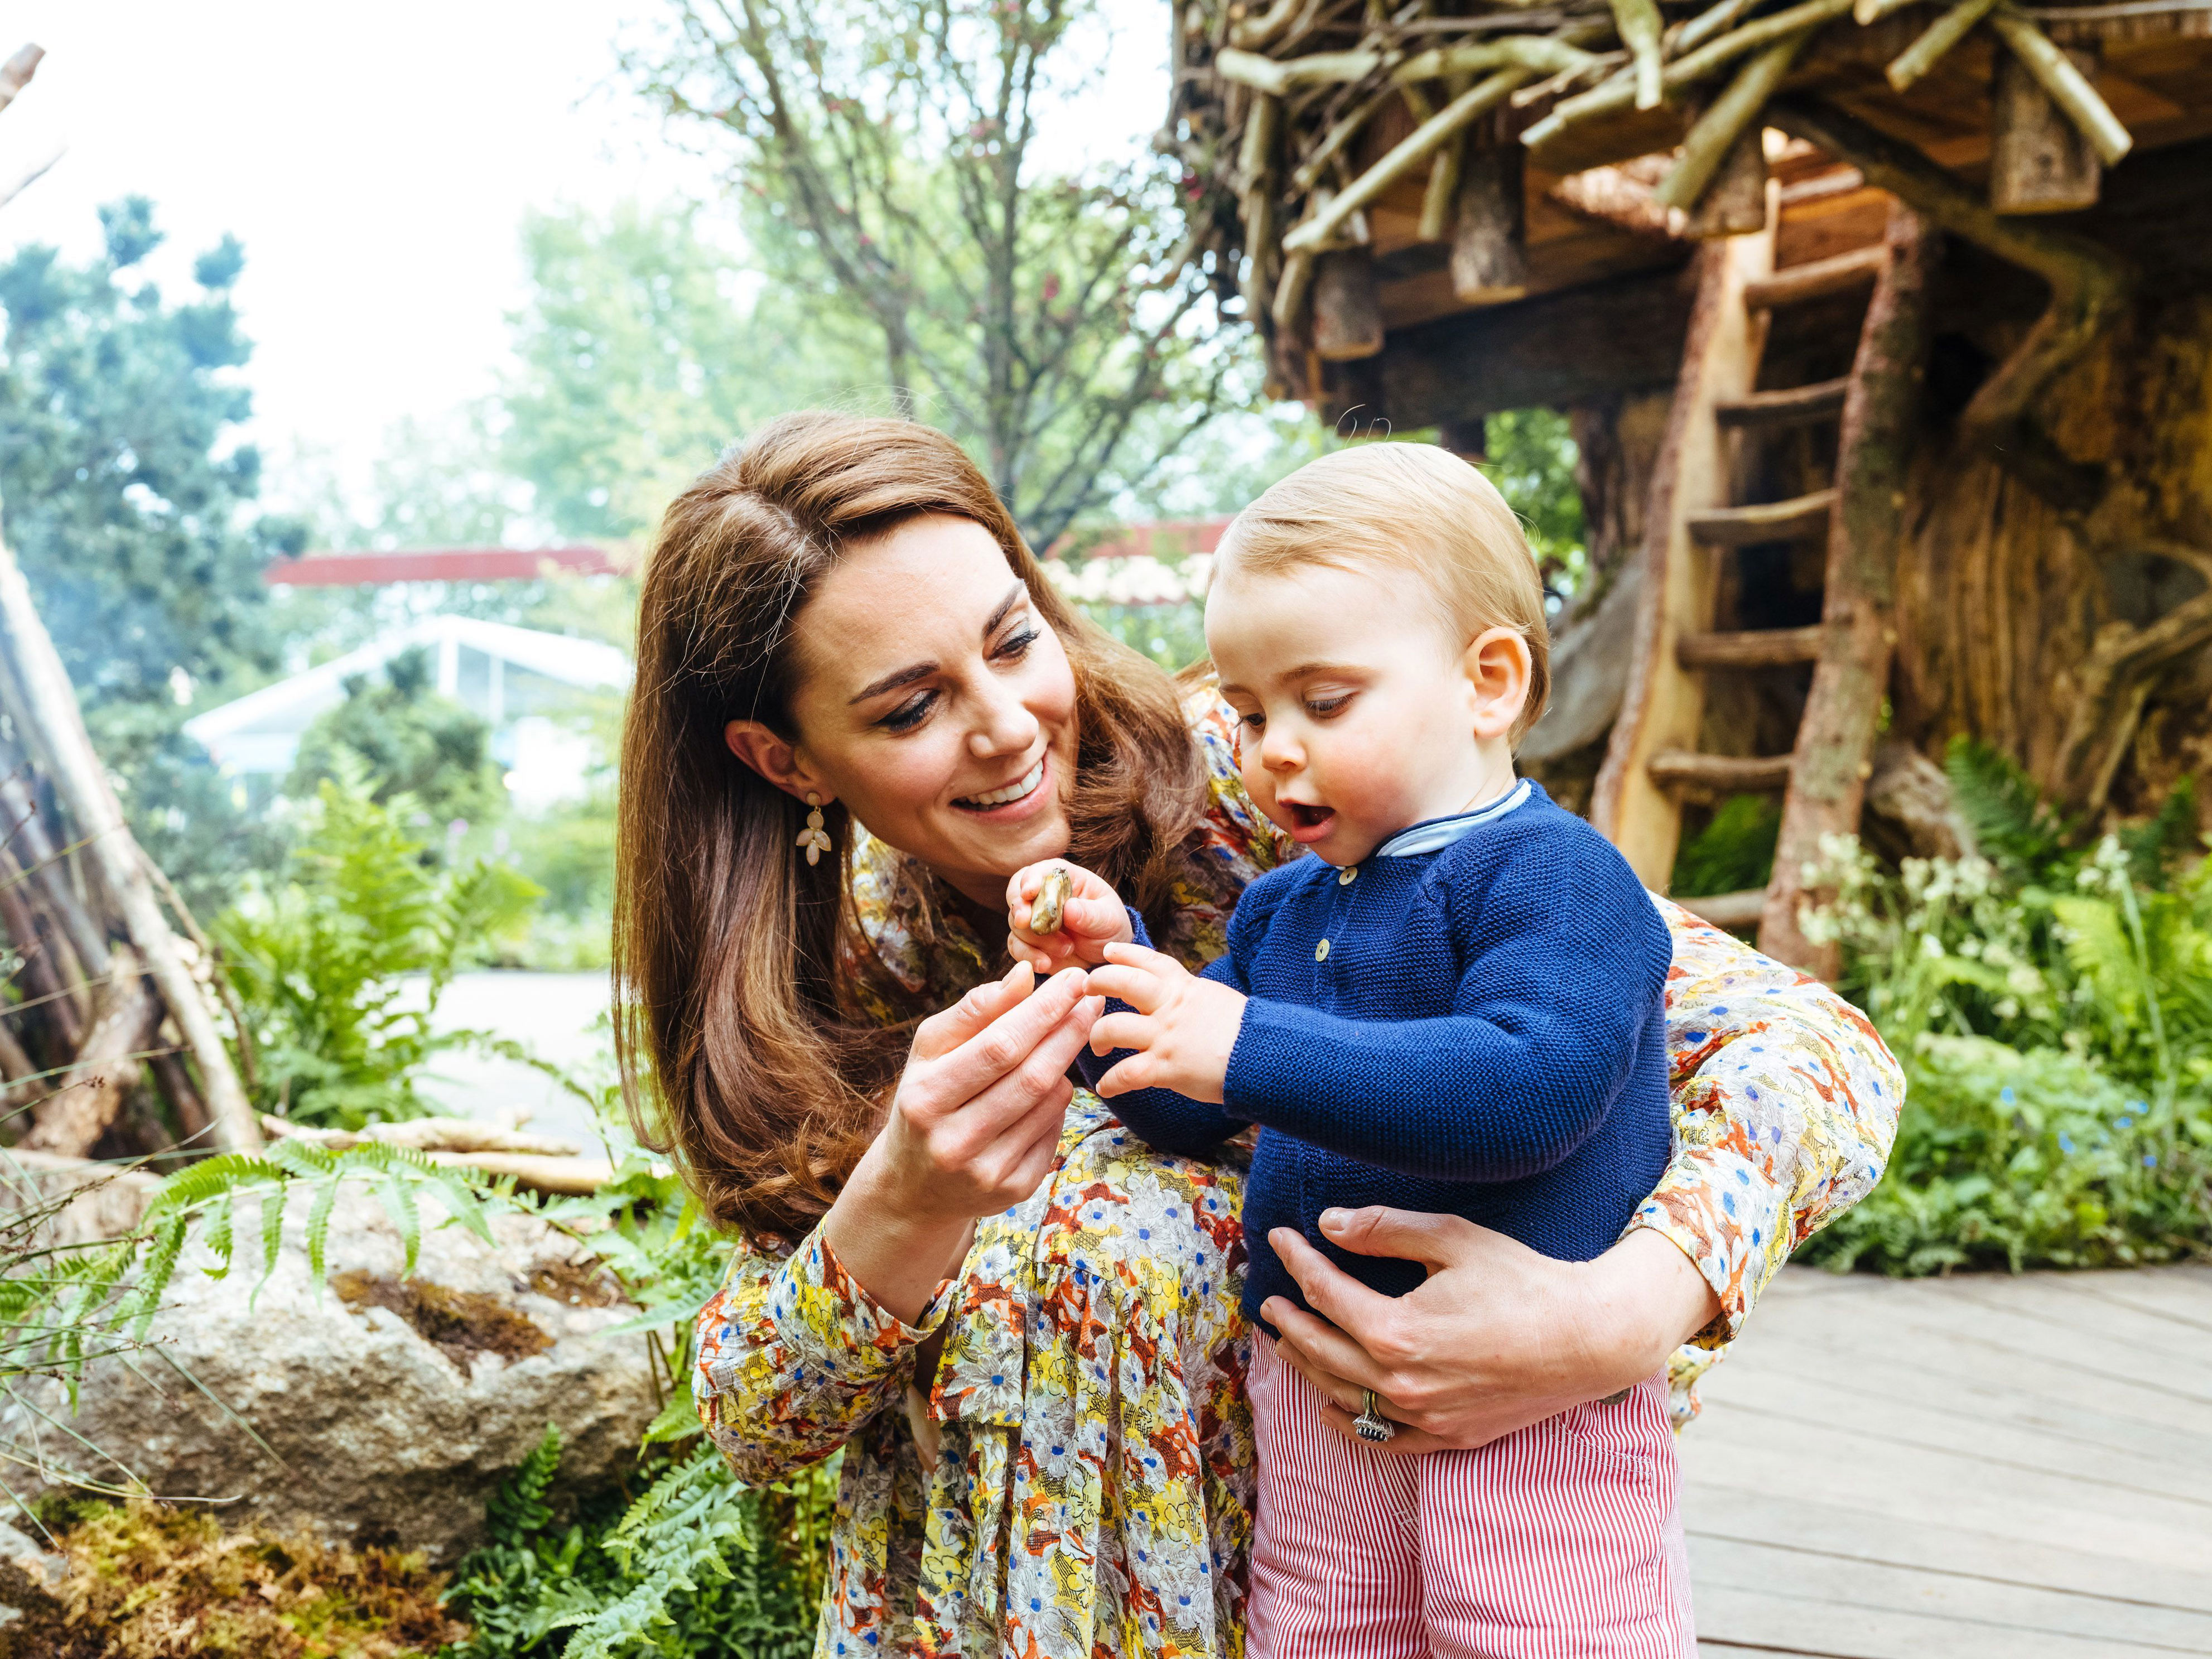 <p><a href="https://www.wonderwall.com/celebrity/profiles/overview/duchess-kate-1356.article">Duchess Kate</a> and son Prince Louis explored the garden she co-designed with Adam White and Andree Davies for the RHS Chelsea Flower Show in London on May 19, 2019.</p>